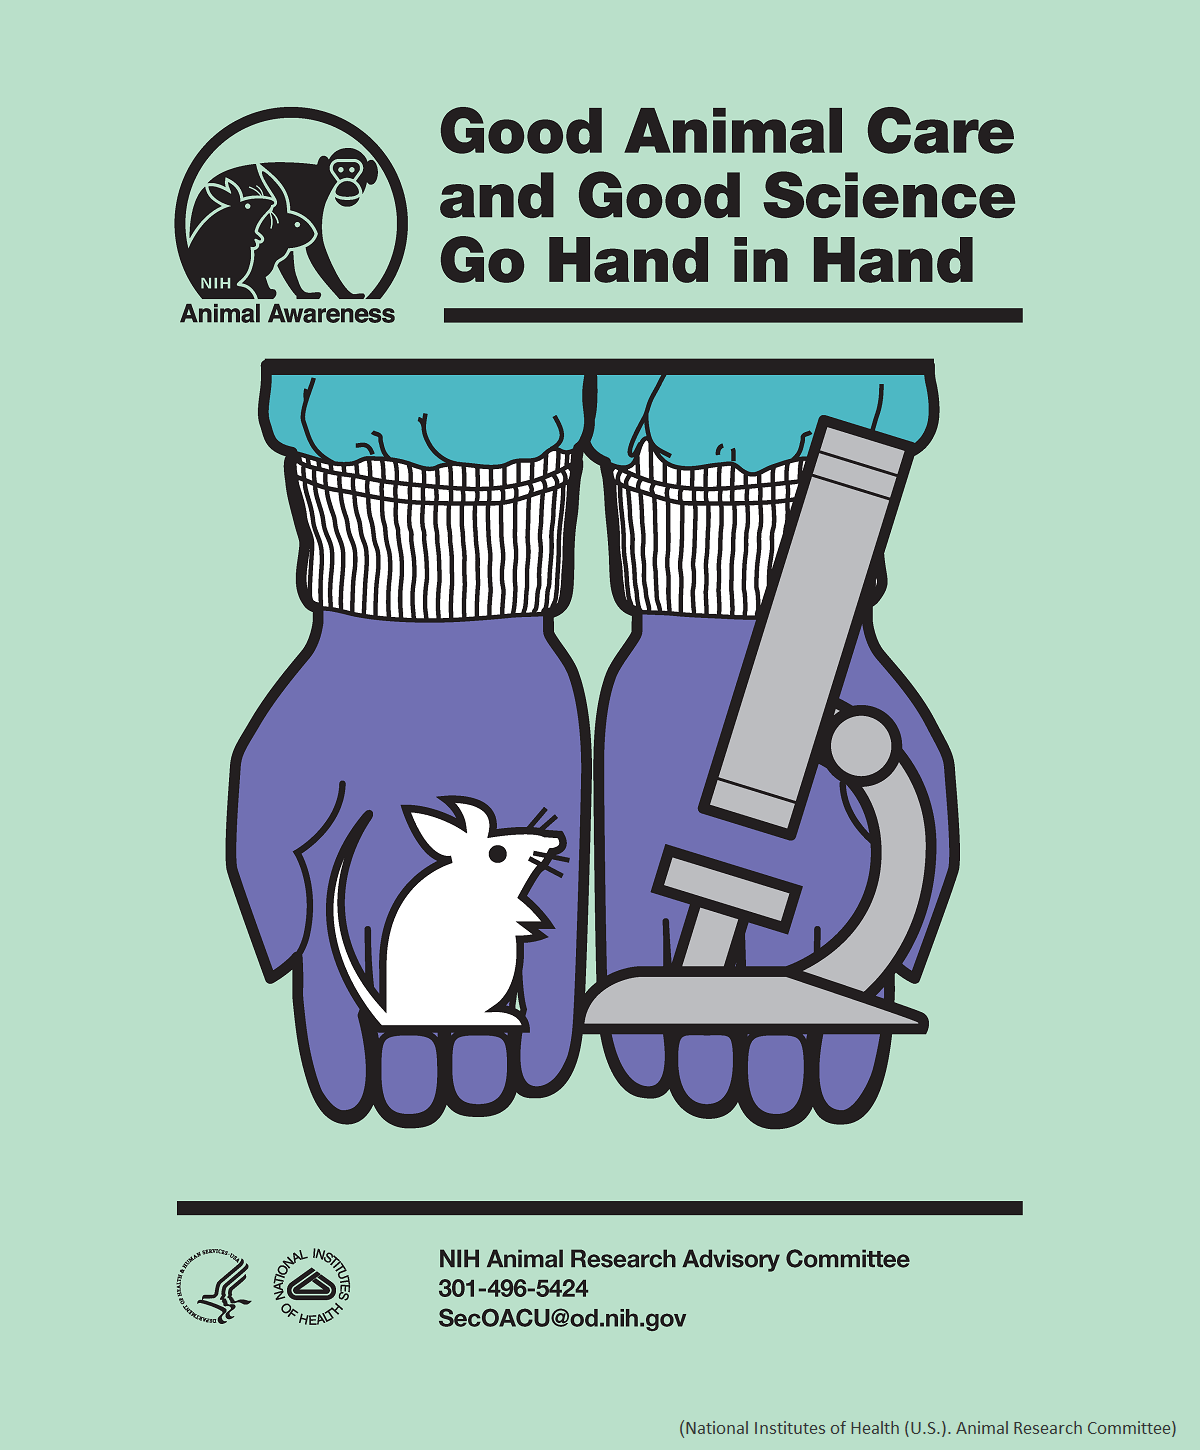 Good animal care and good science go hand in hand